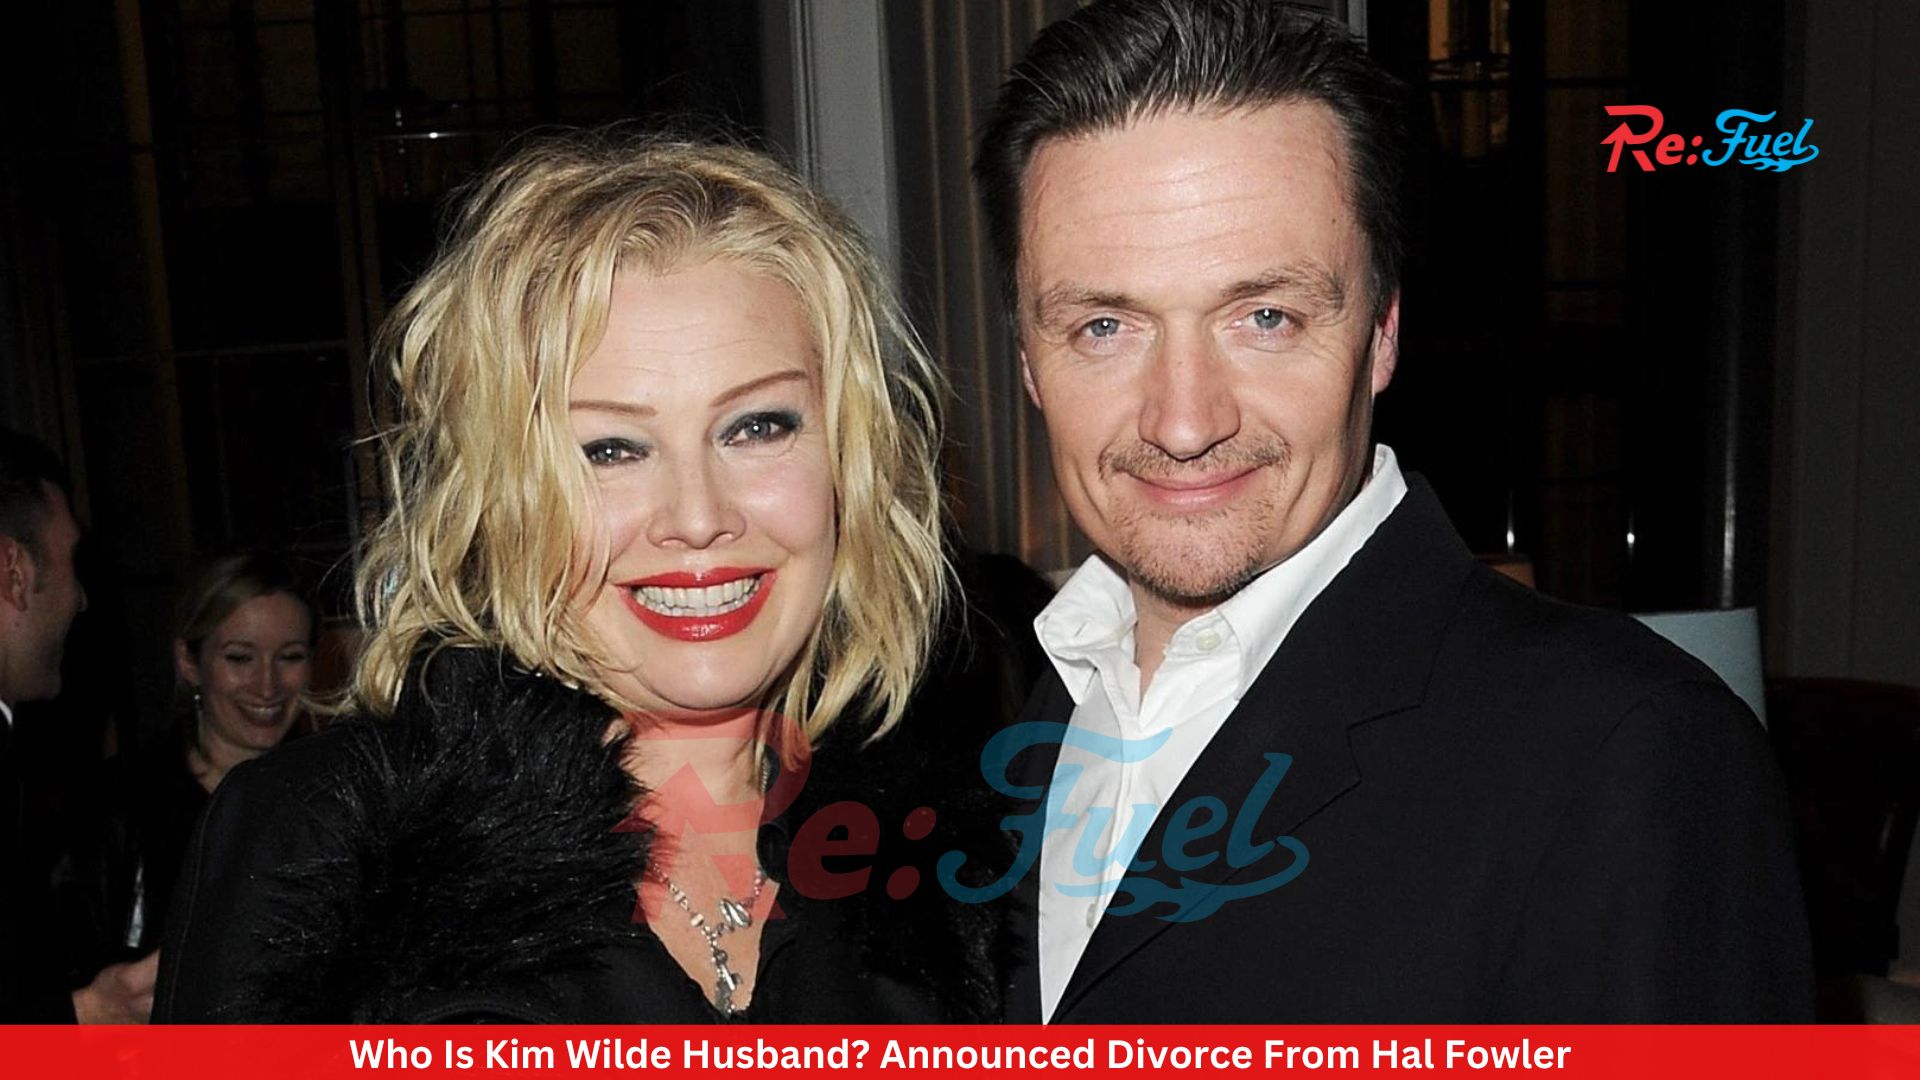 Who Is Kim Wilde Husband? Announced Divorce From Hal Fowler